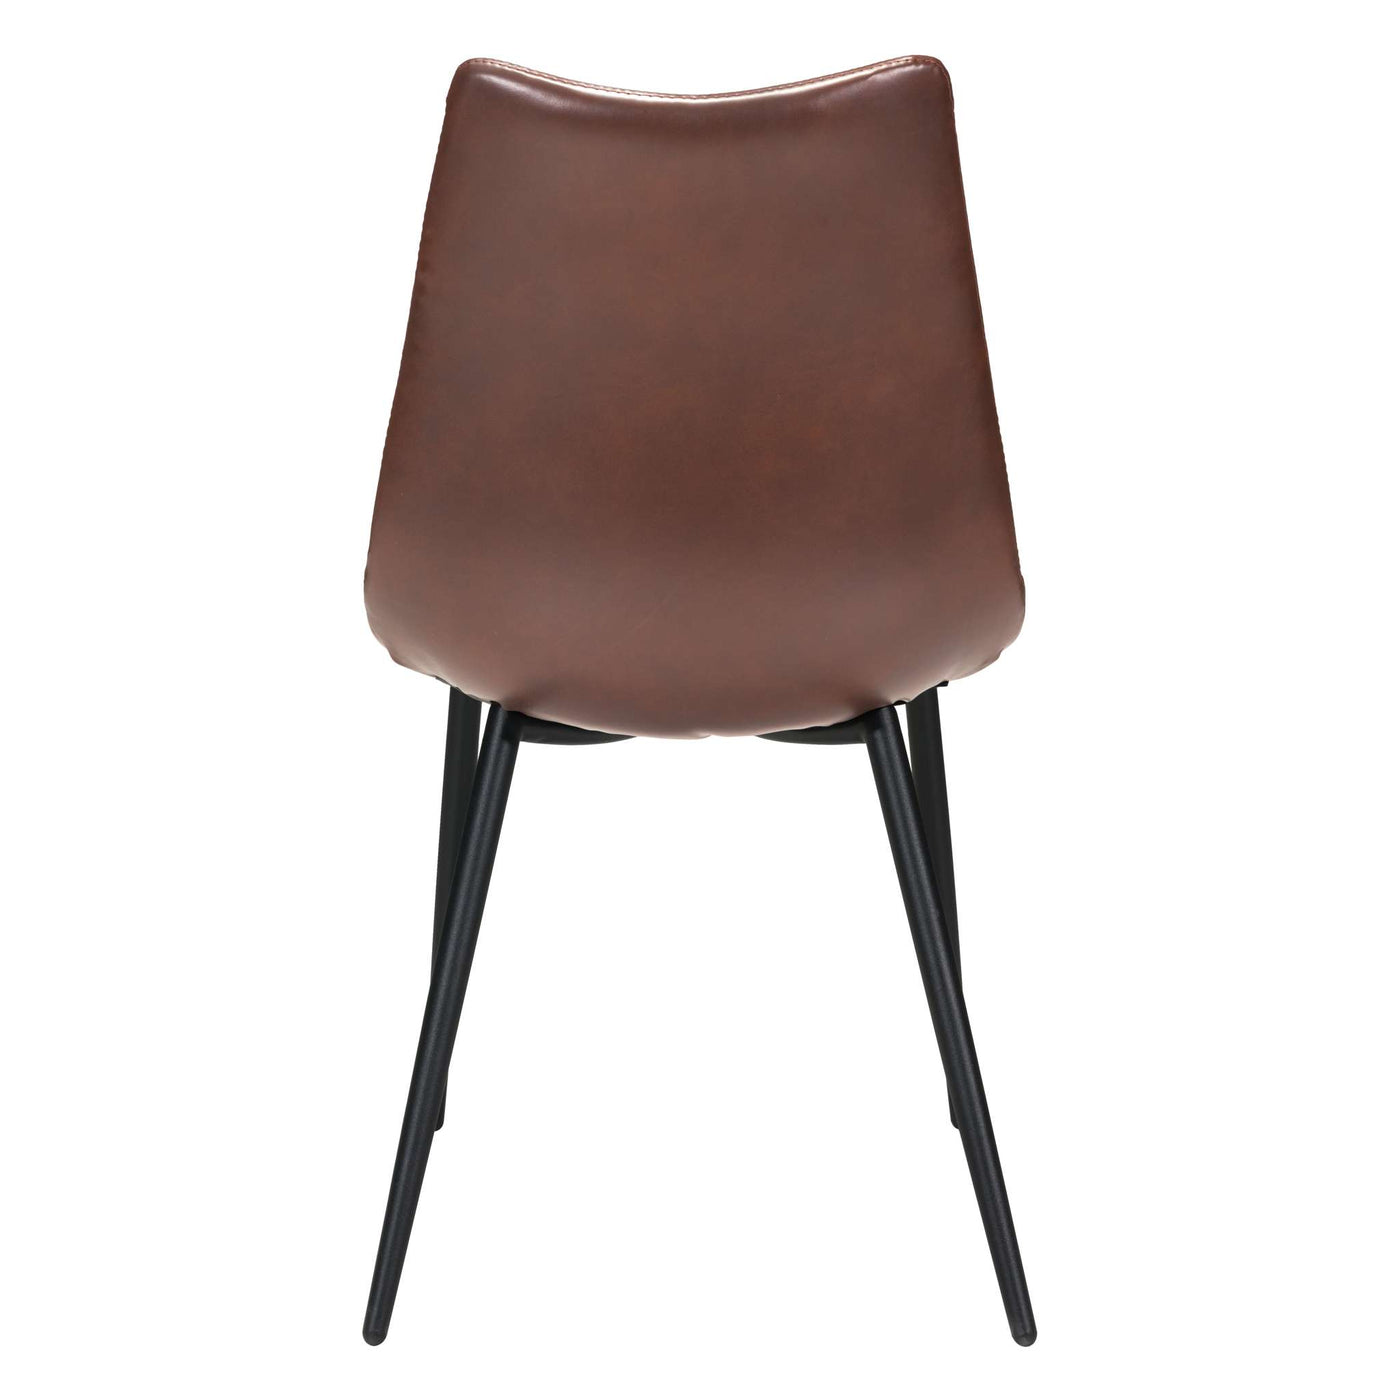 Zuo Mod Norwich Dining Chair